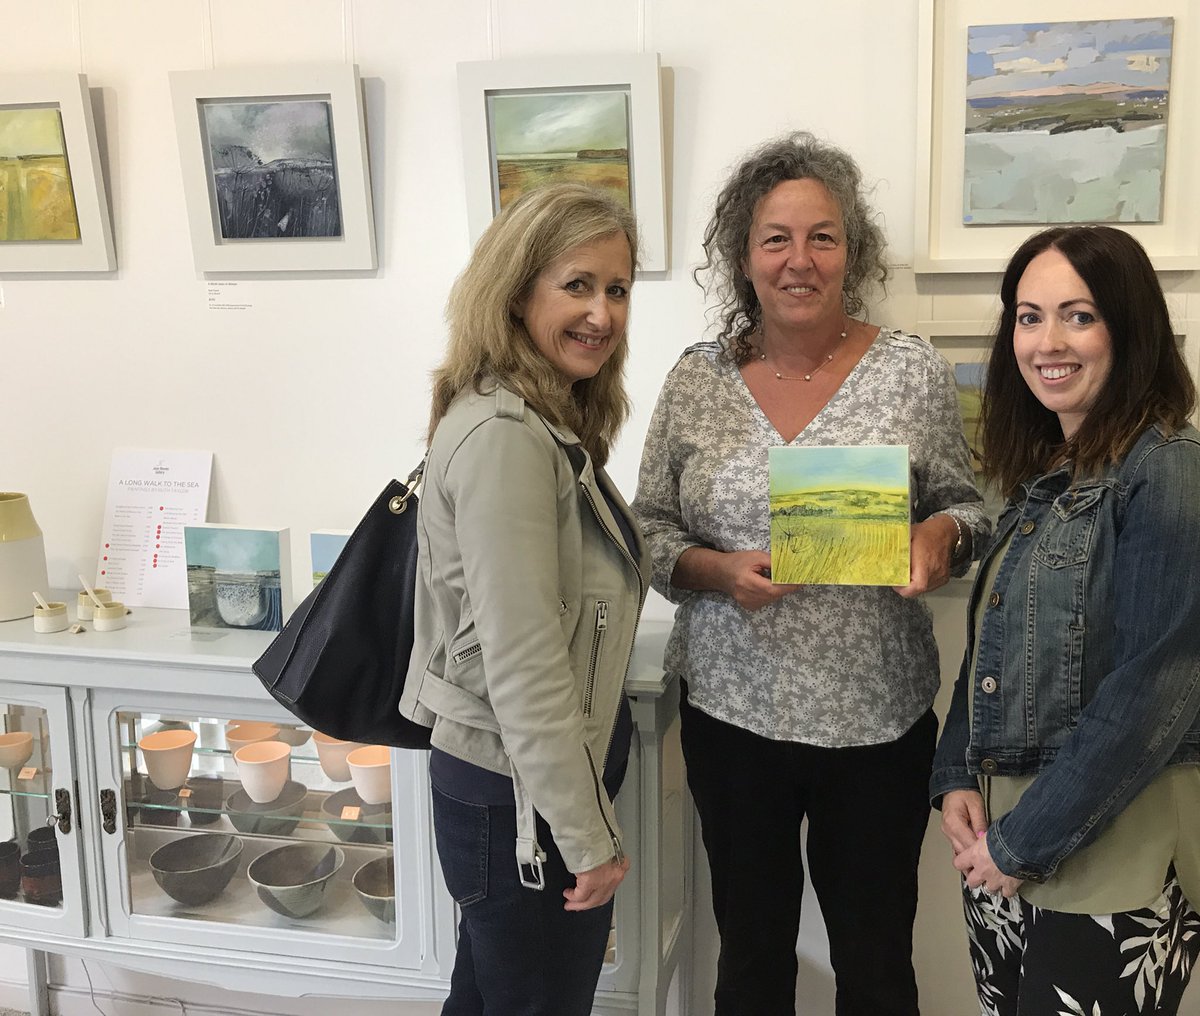 Our first sale today for #RuthTaylor in Padstow 😊#longwalktothesea #exhibition